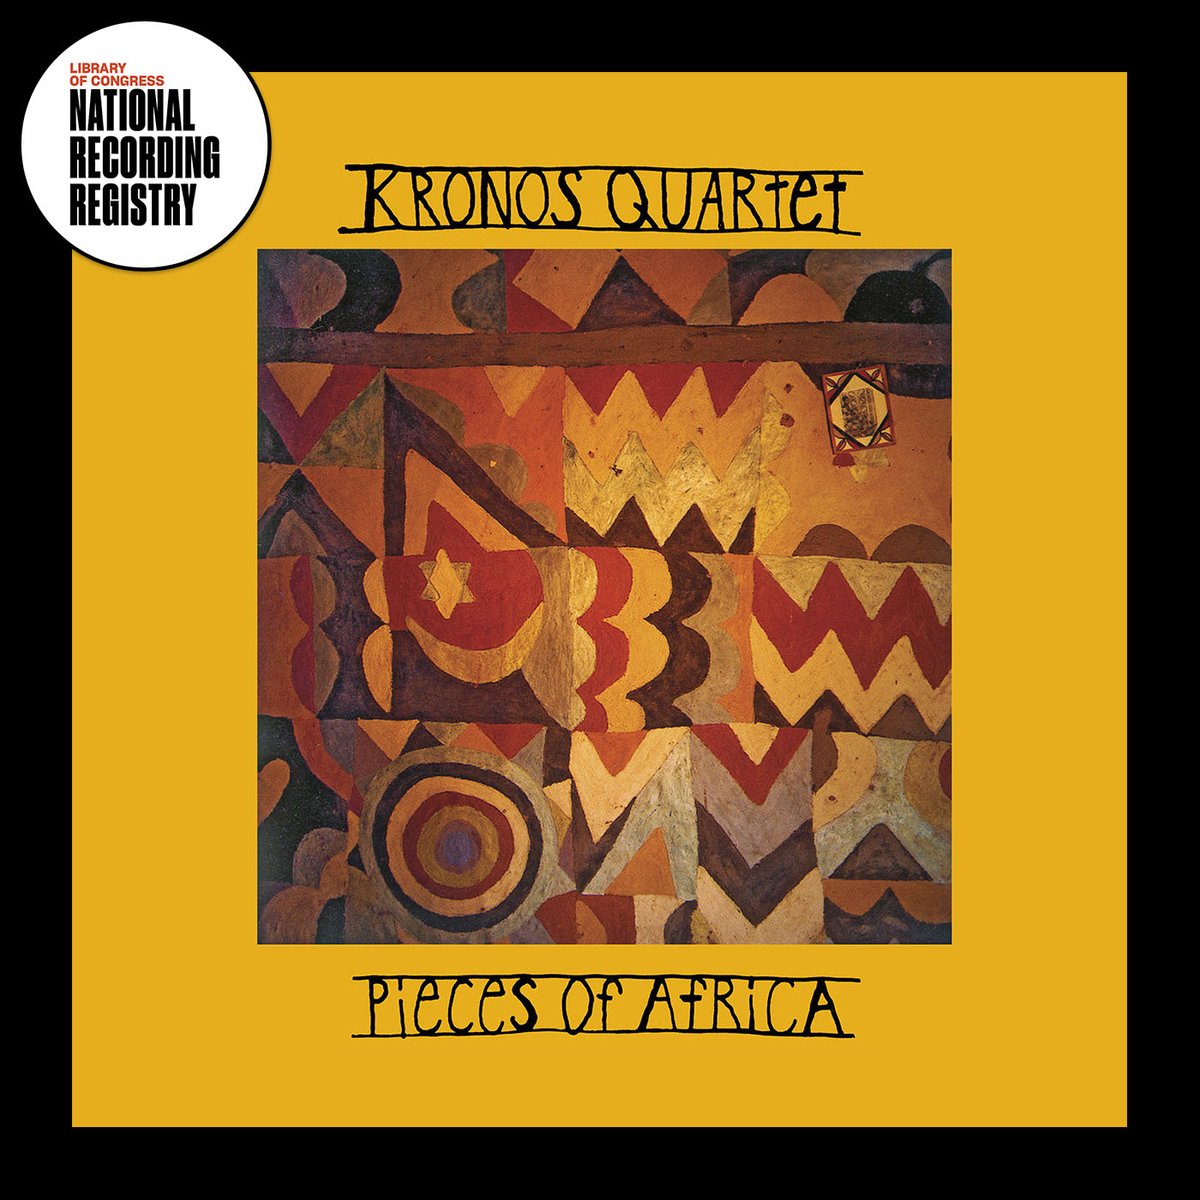 Congratulations to @KronosQuartet, whose acclaimed 1992 Nonesuch album 'Pieces of Africa' has been inducted into the @librarycongress National Recording Registry! #NatRecRegistry nonesuch.com/journal/kronos…